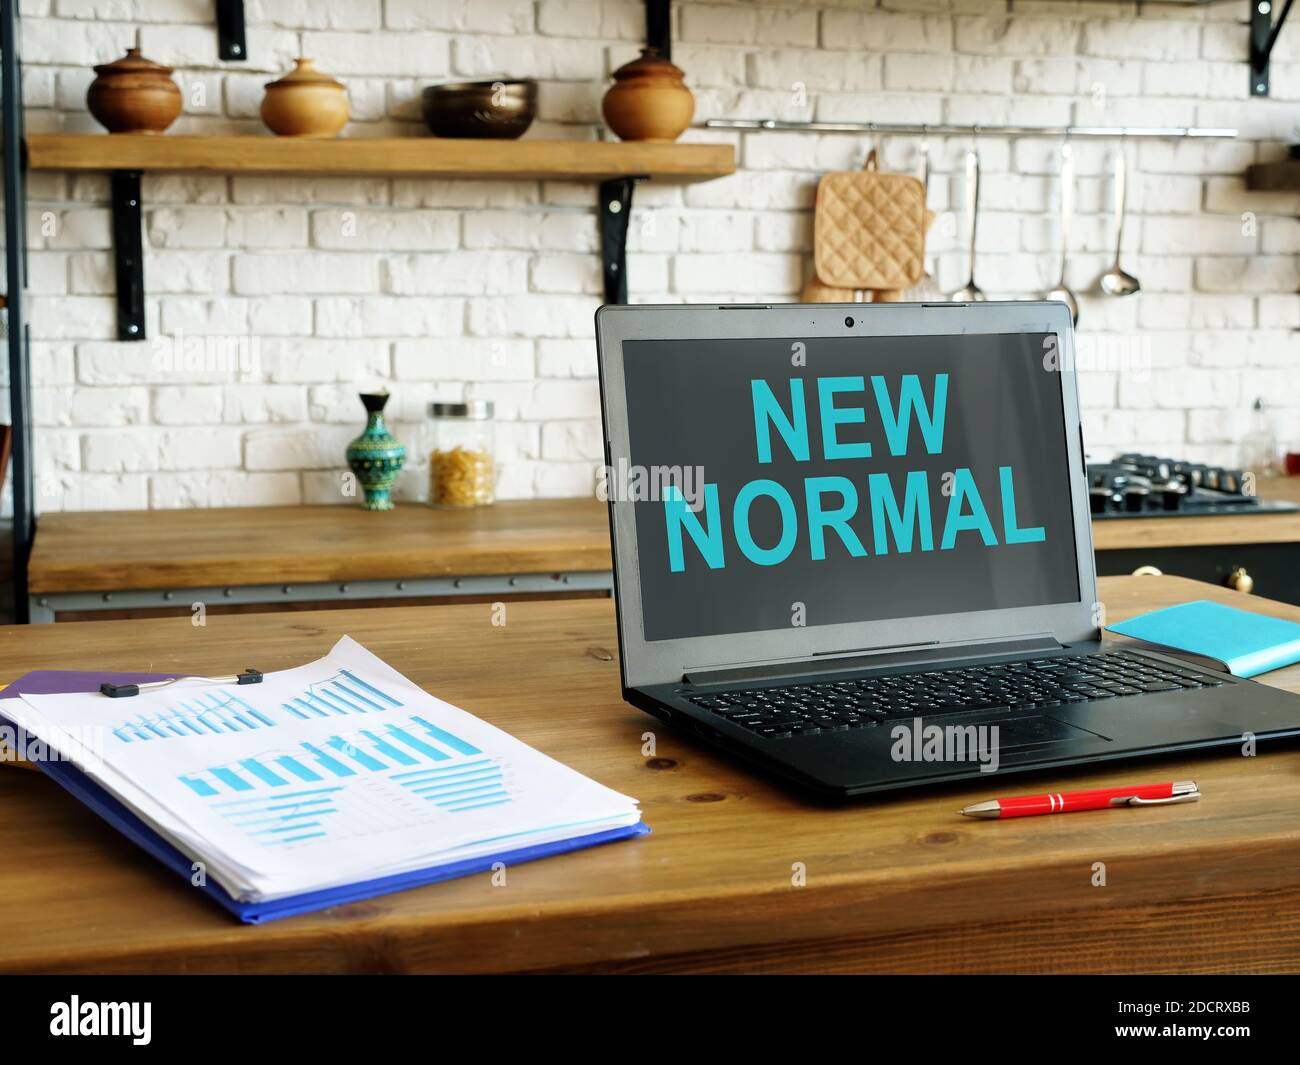 New normal words on the laptop screen for work at home. Stock Photo